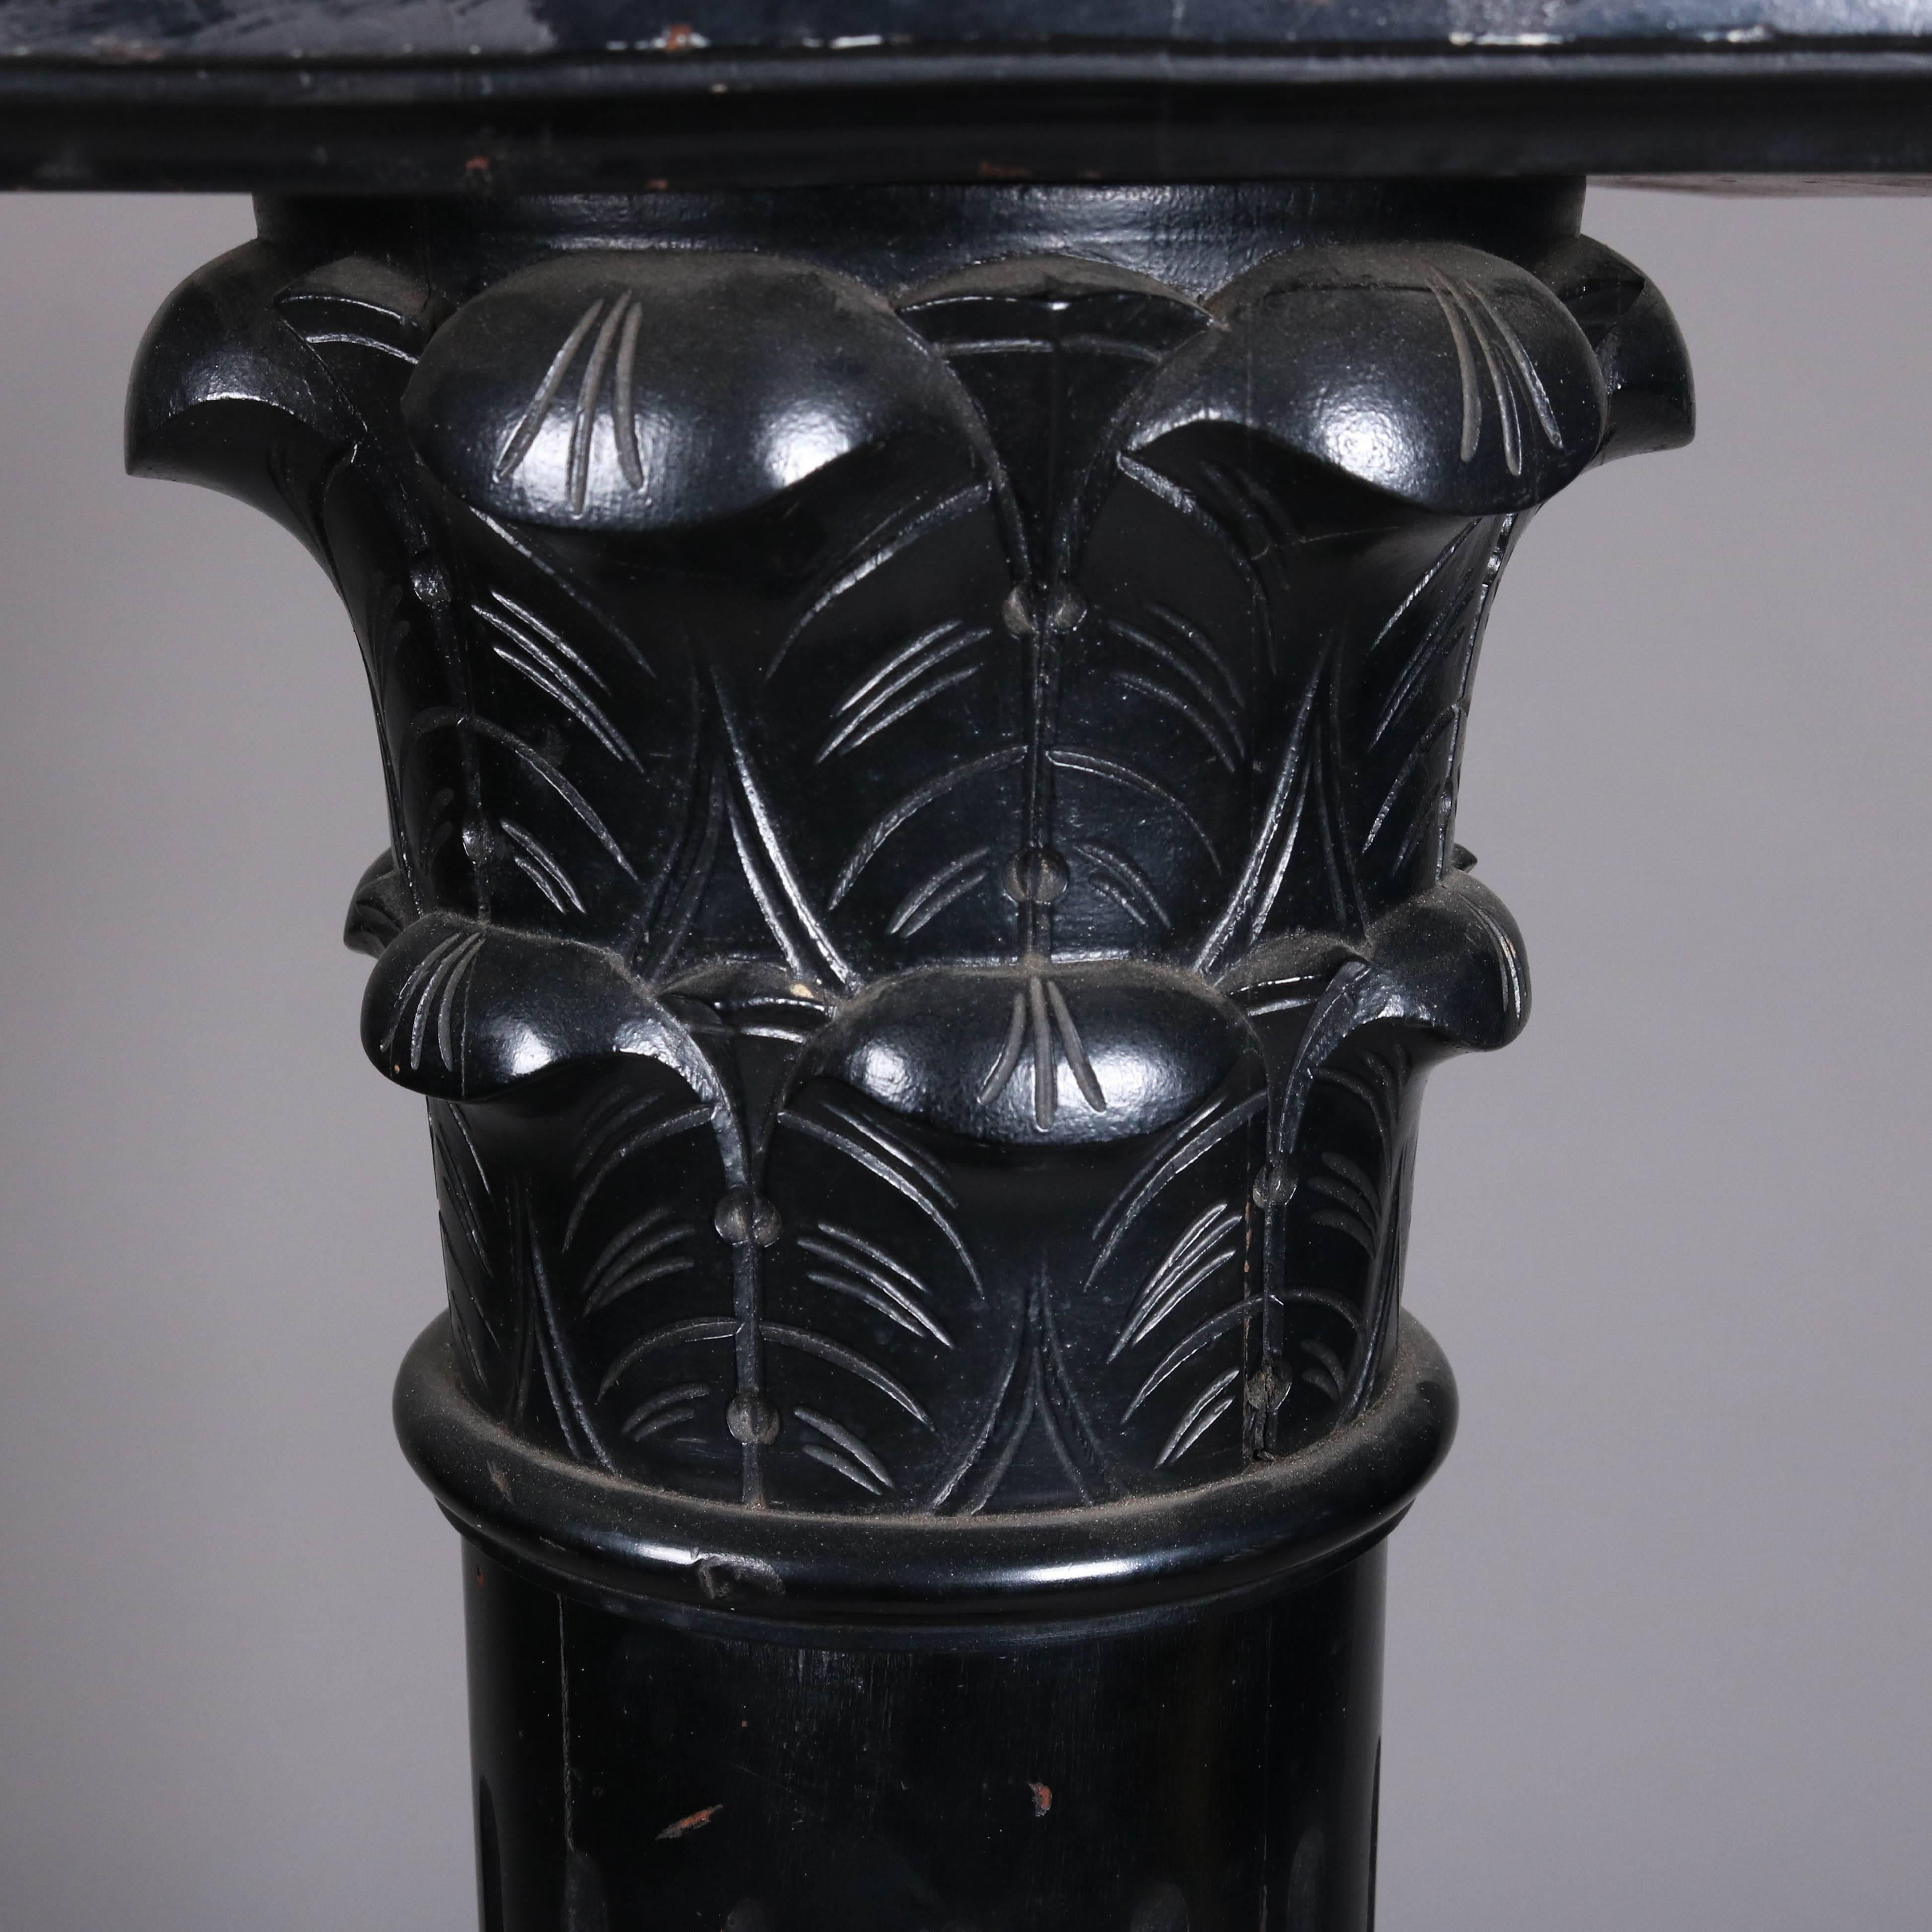 Carved Antique Neoclassical Ebonized Corinthian Column Form Sculpture Display Stand